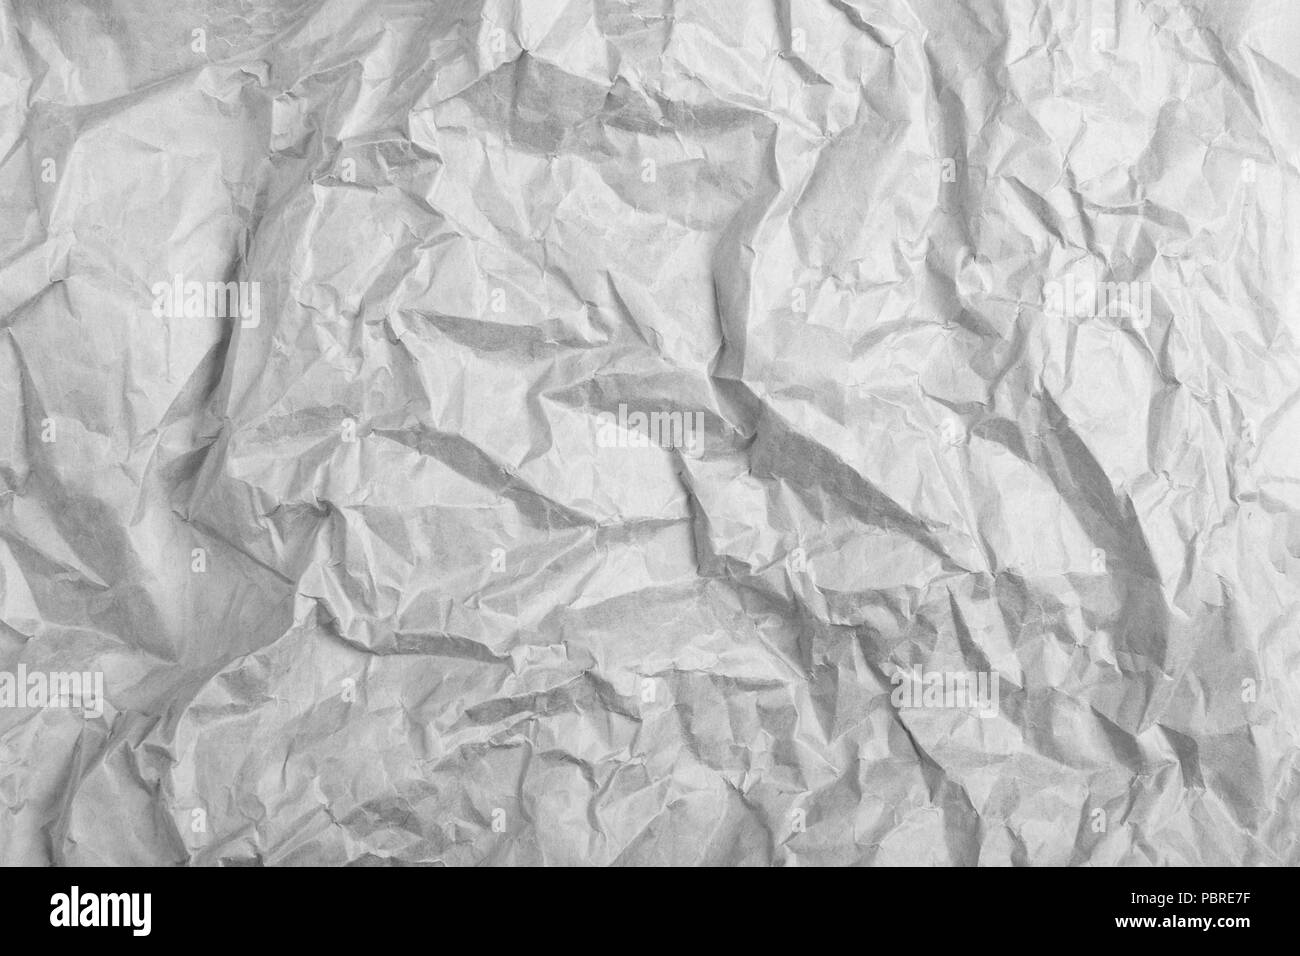 https://c8.alamy.com/comp/PBRE7F/highly-crumpled-gray-paper-sheet-with-dents-PBRE7F.jpg